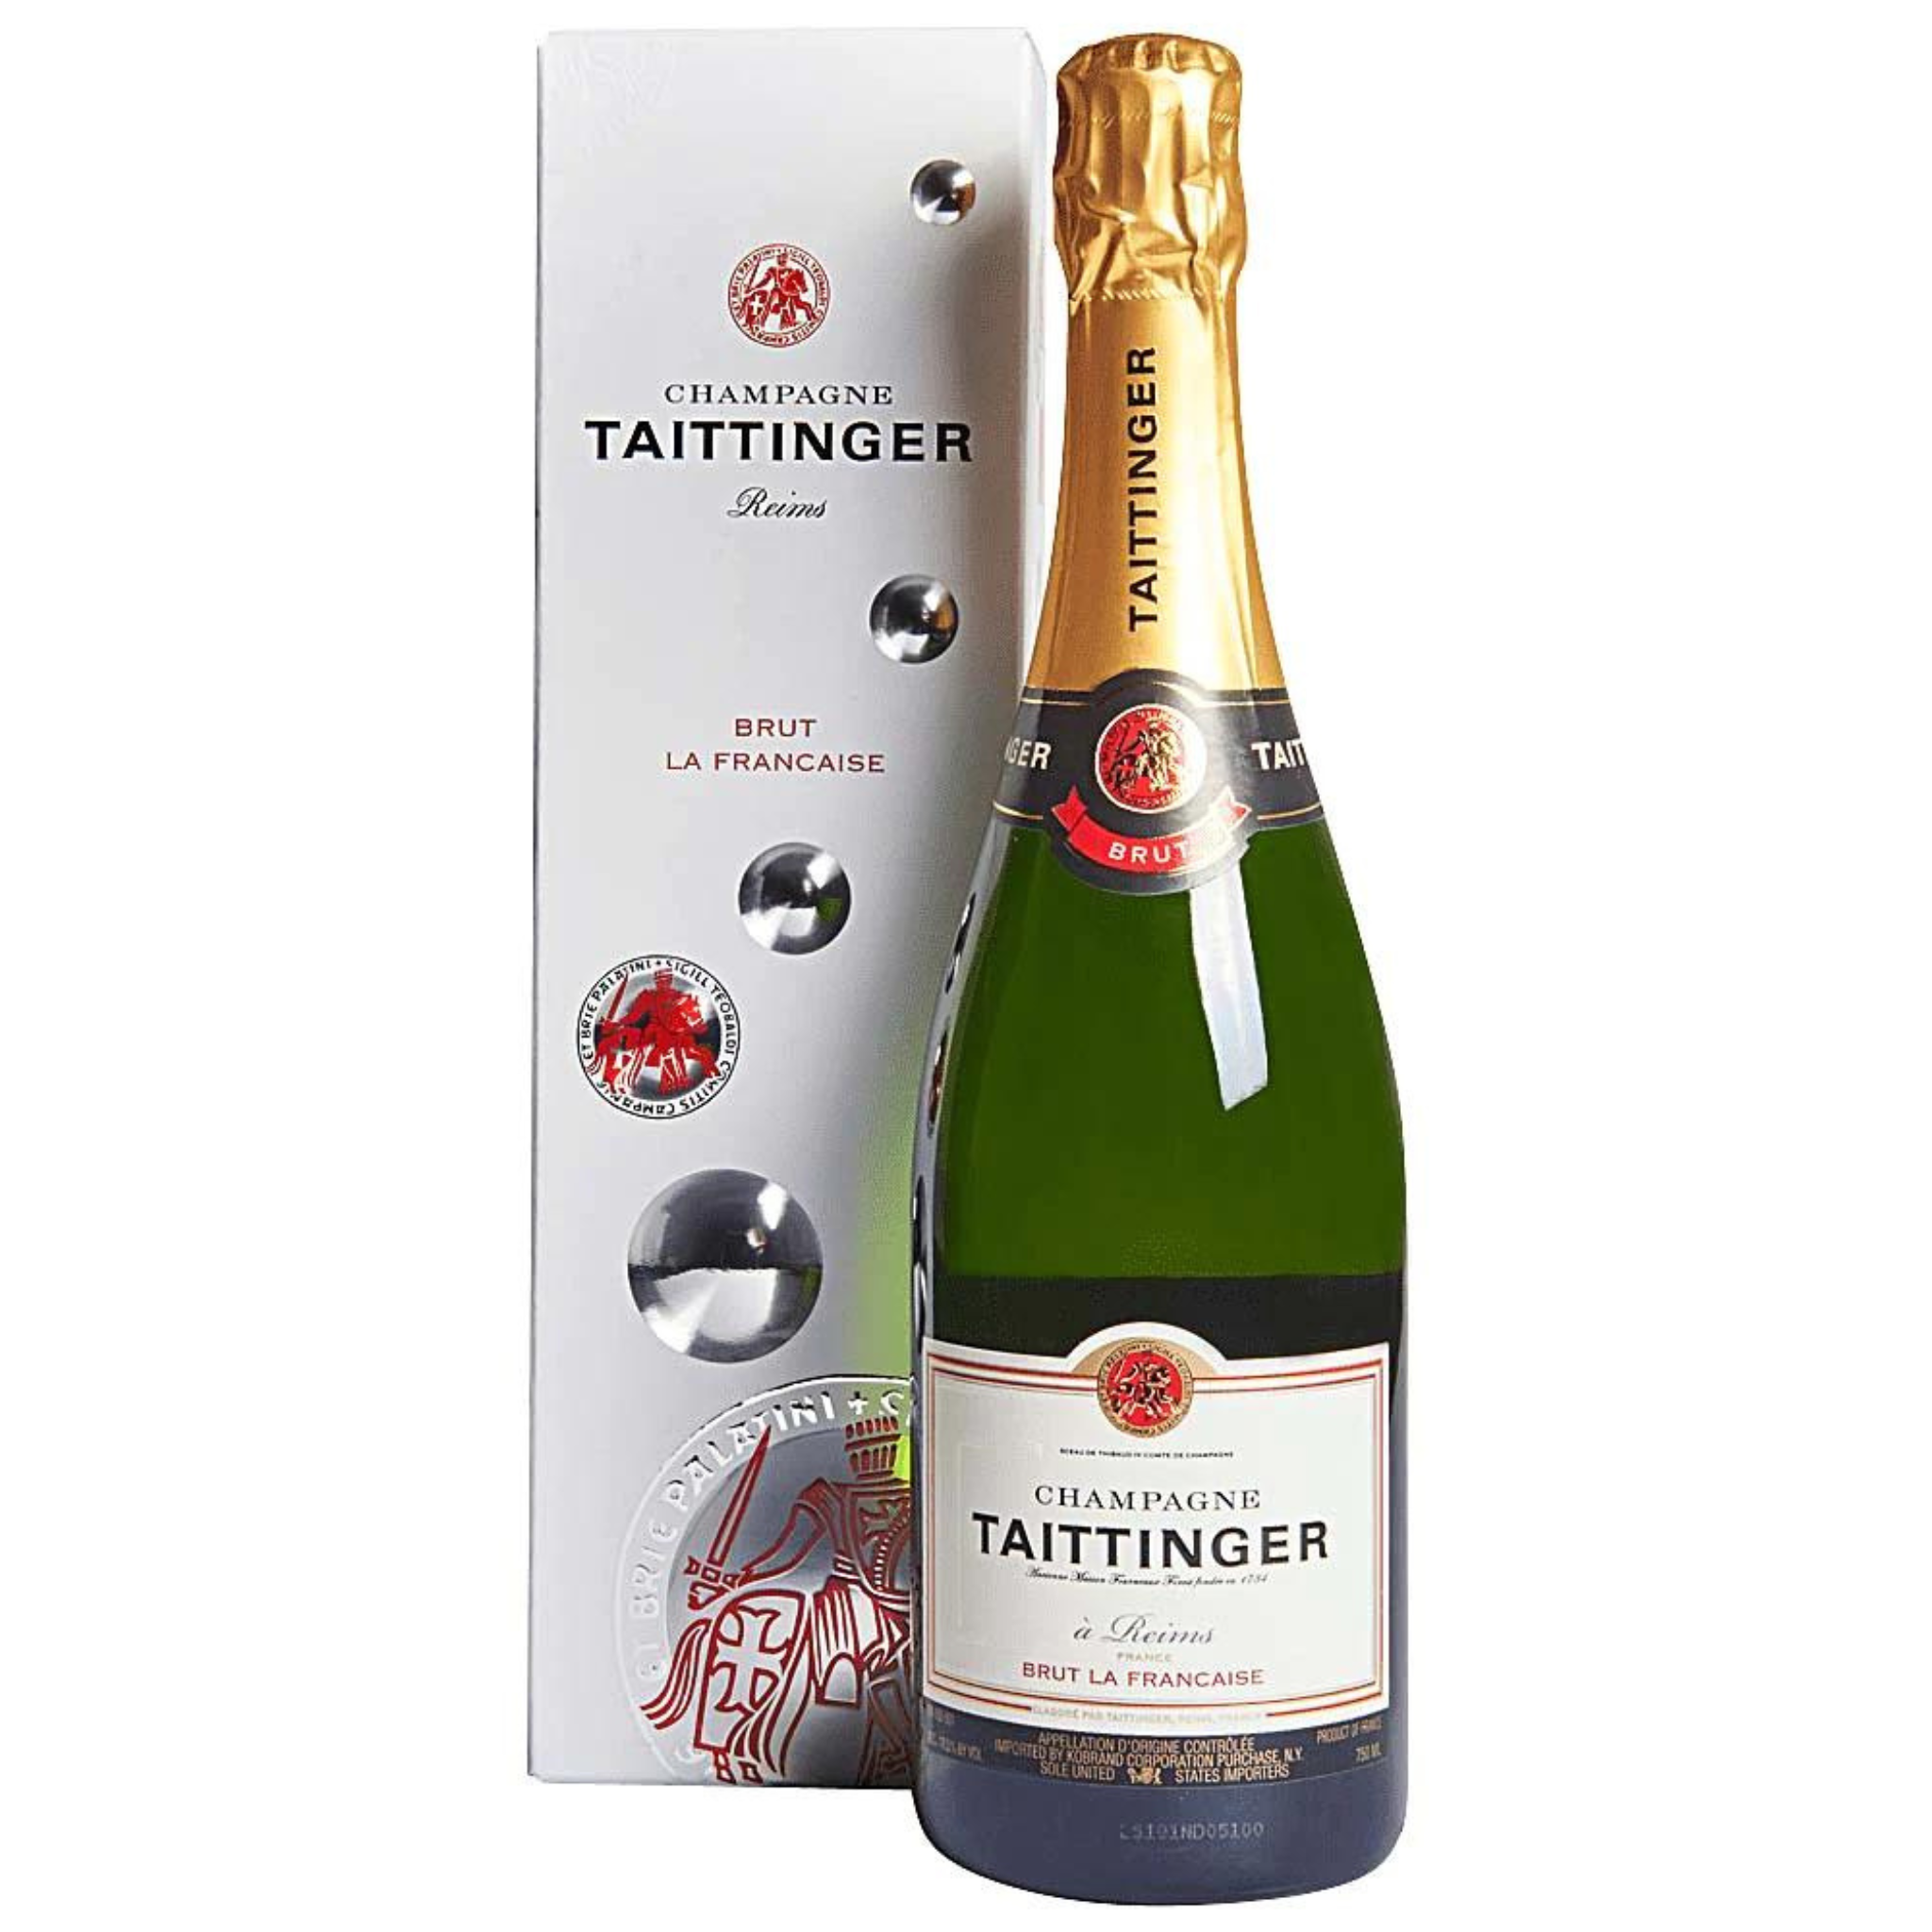 Champagne Taittinger, Brut Reserve, new year gift box, 750 ml Taittinger,  Brut Reserve, new year gift box – price, reviews